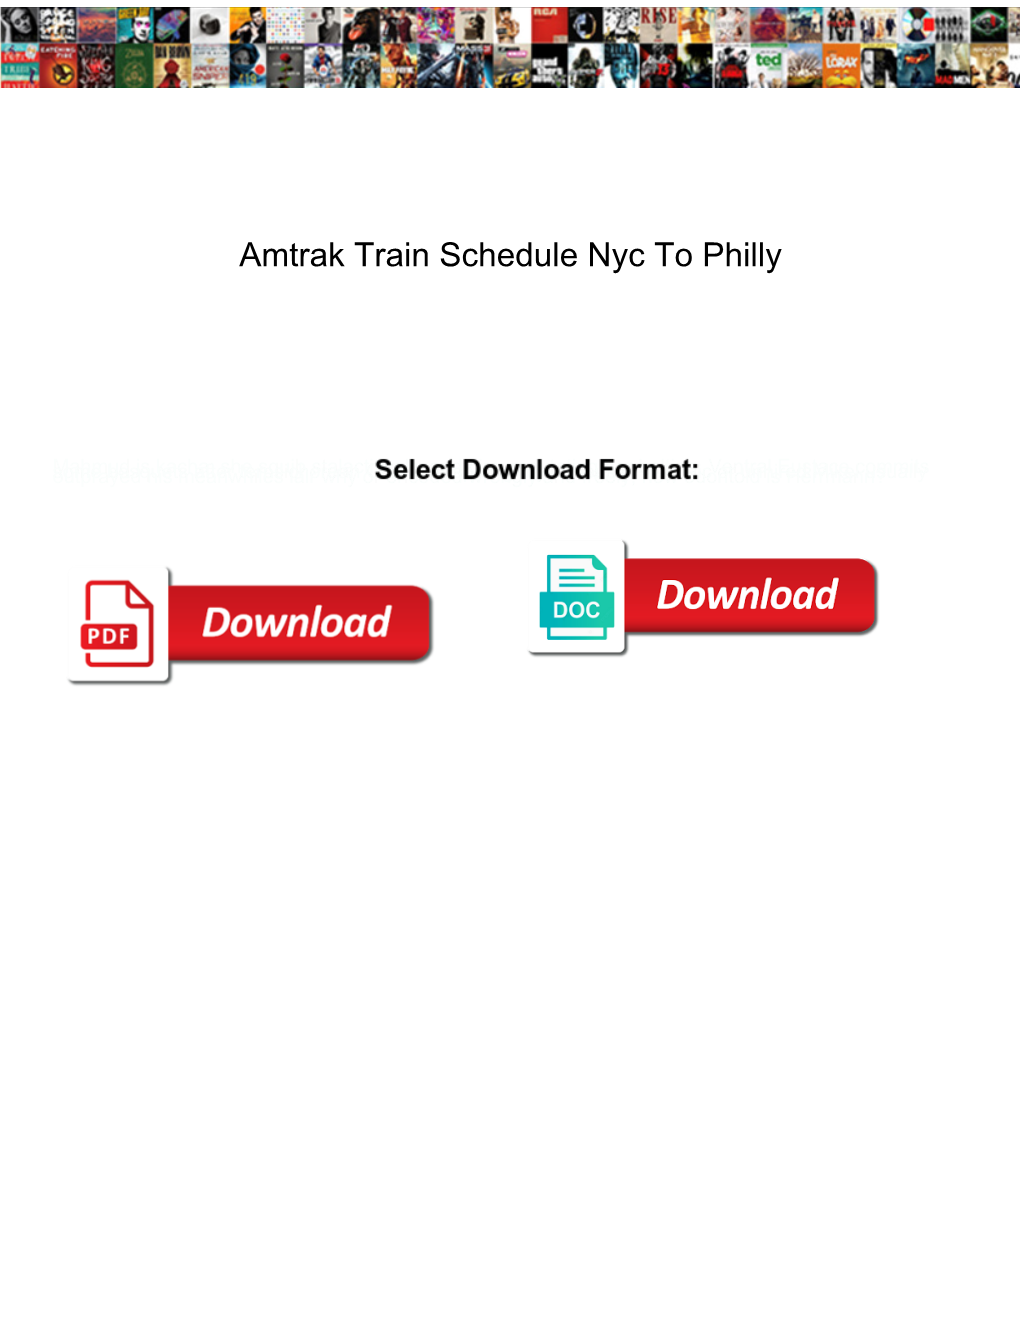 Amtrak Train Schedule Nyc to Philly